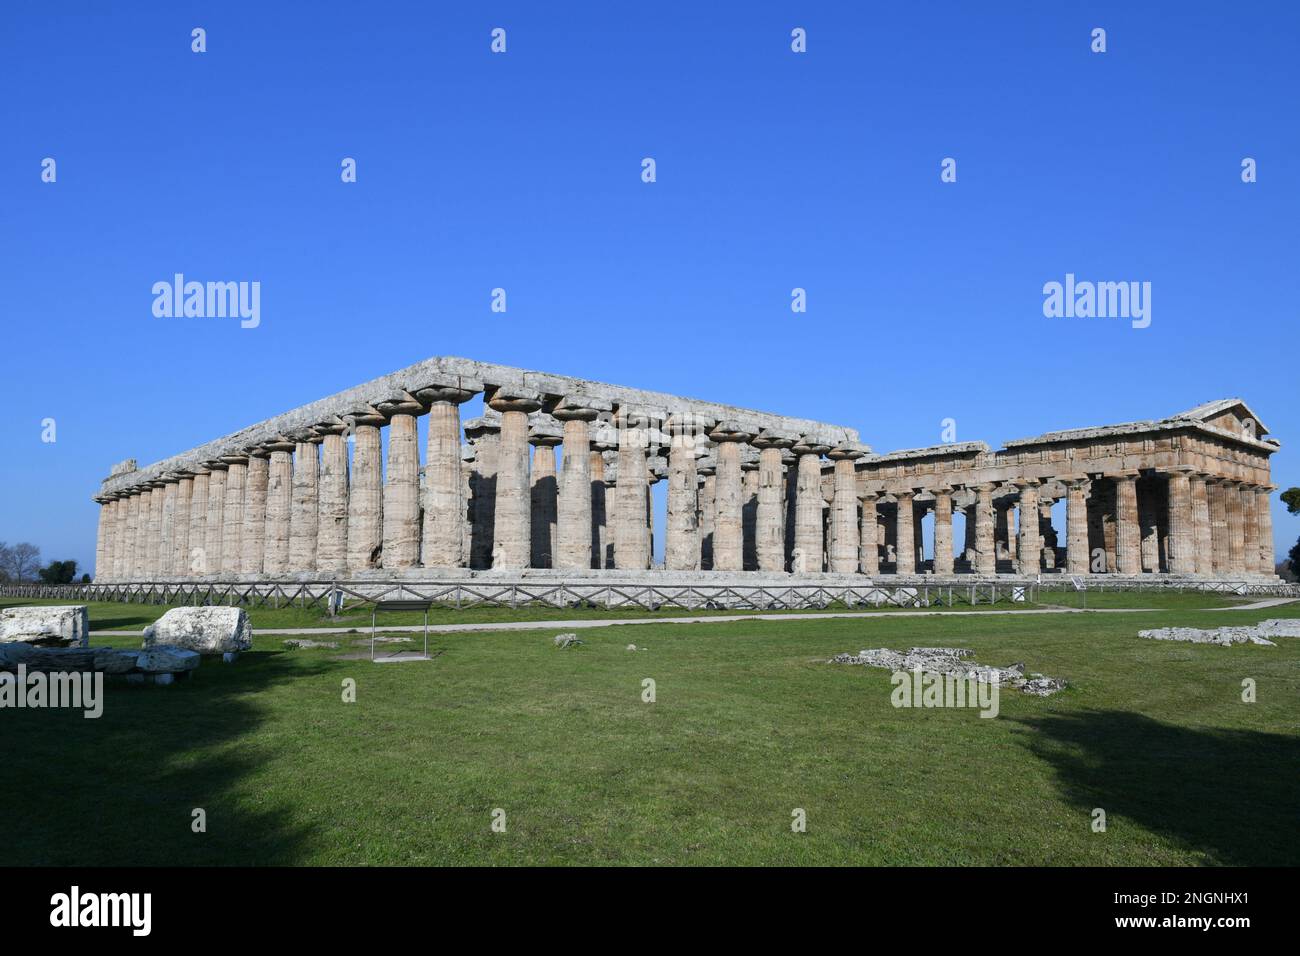 Architecture of an ancient Greek temple in the archaeological park in Salerno province, Campania state, Italy. Stock Photo